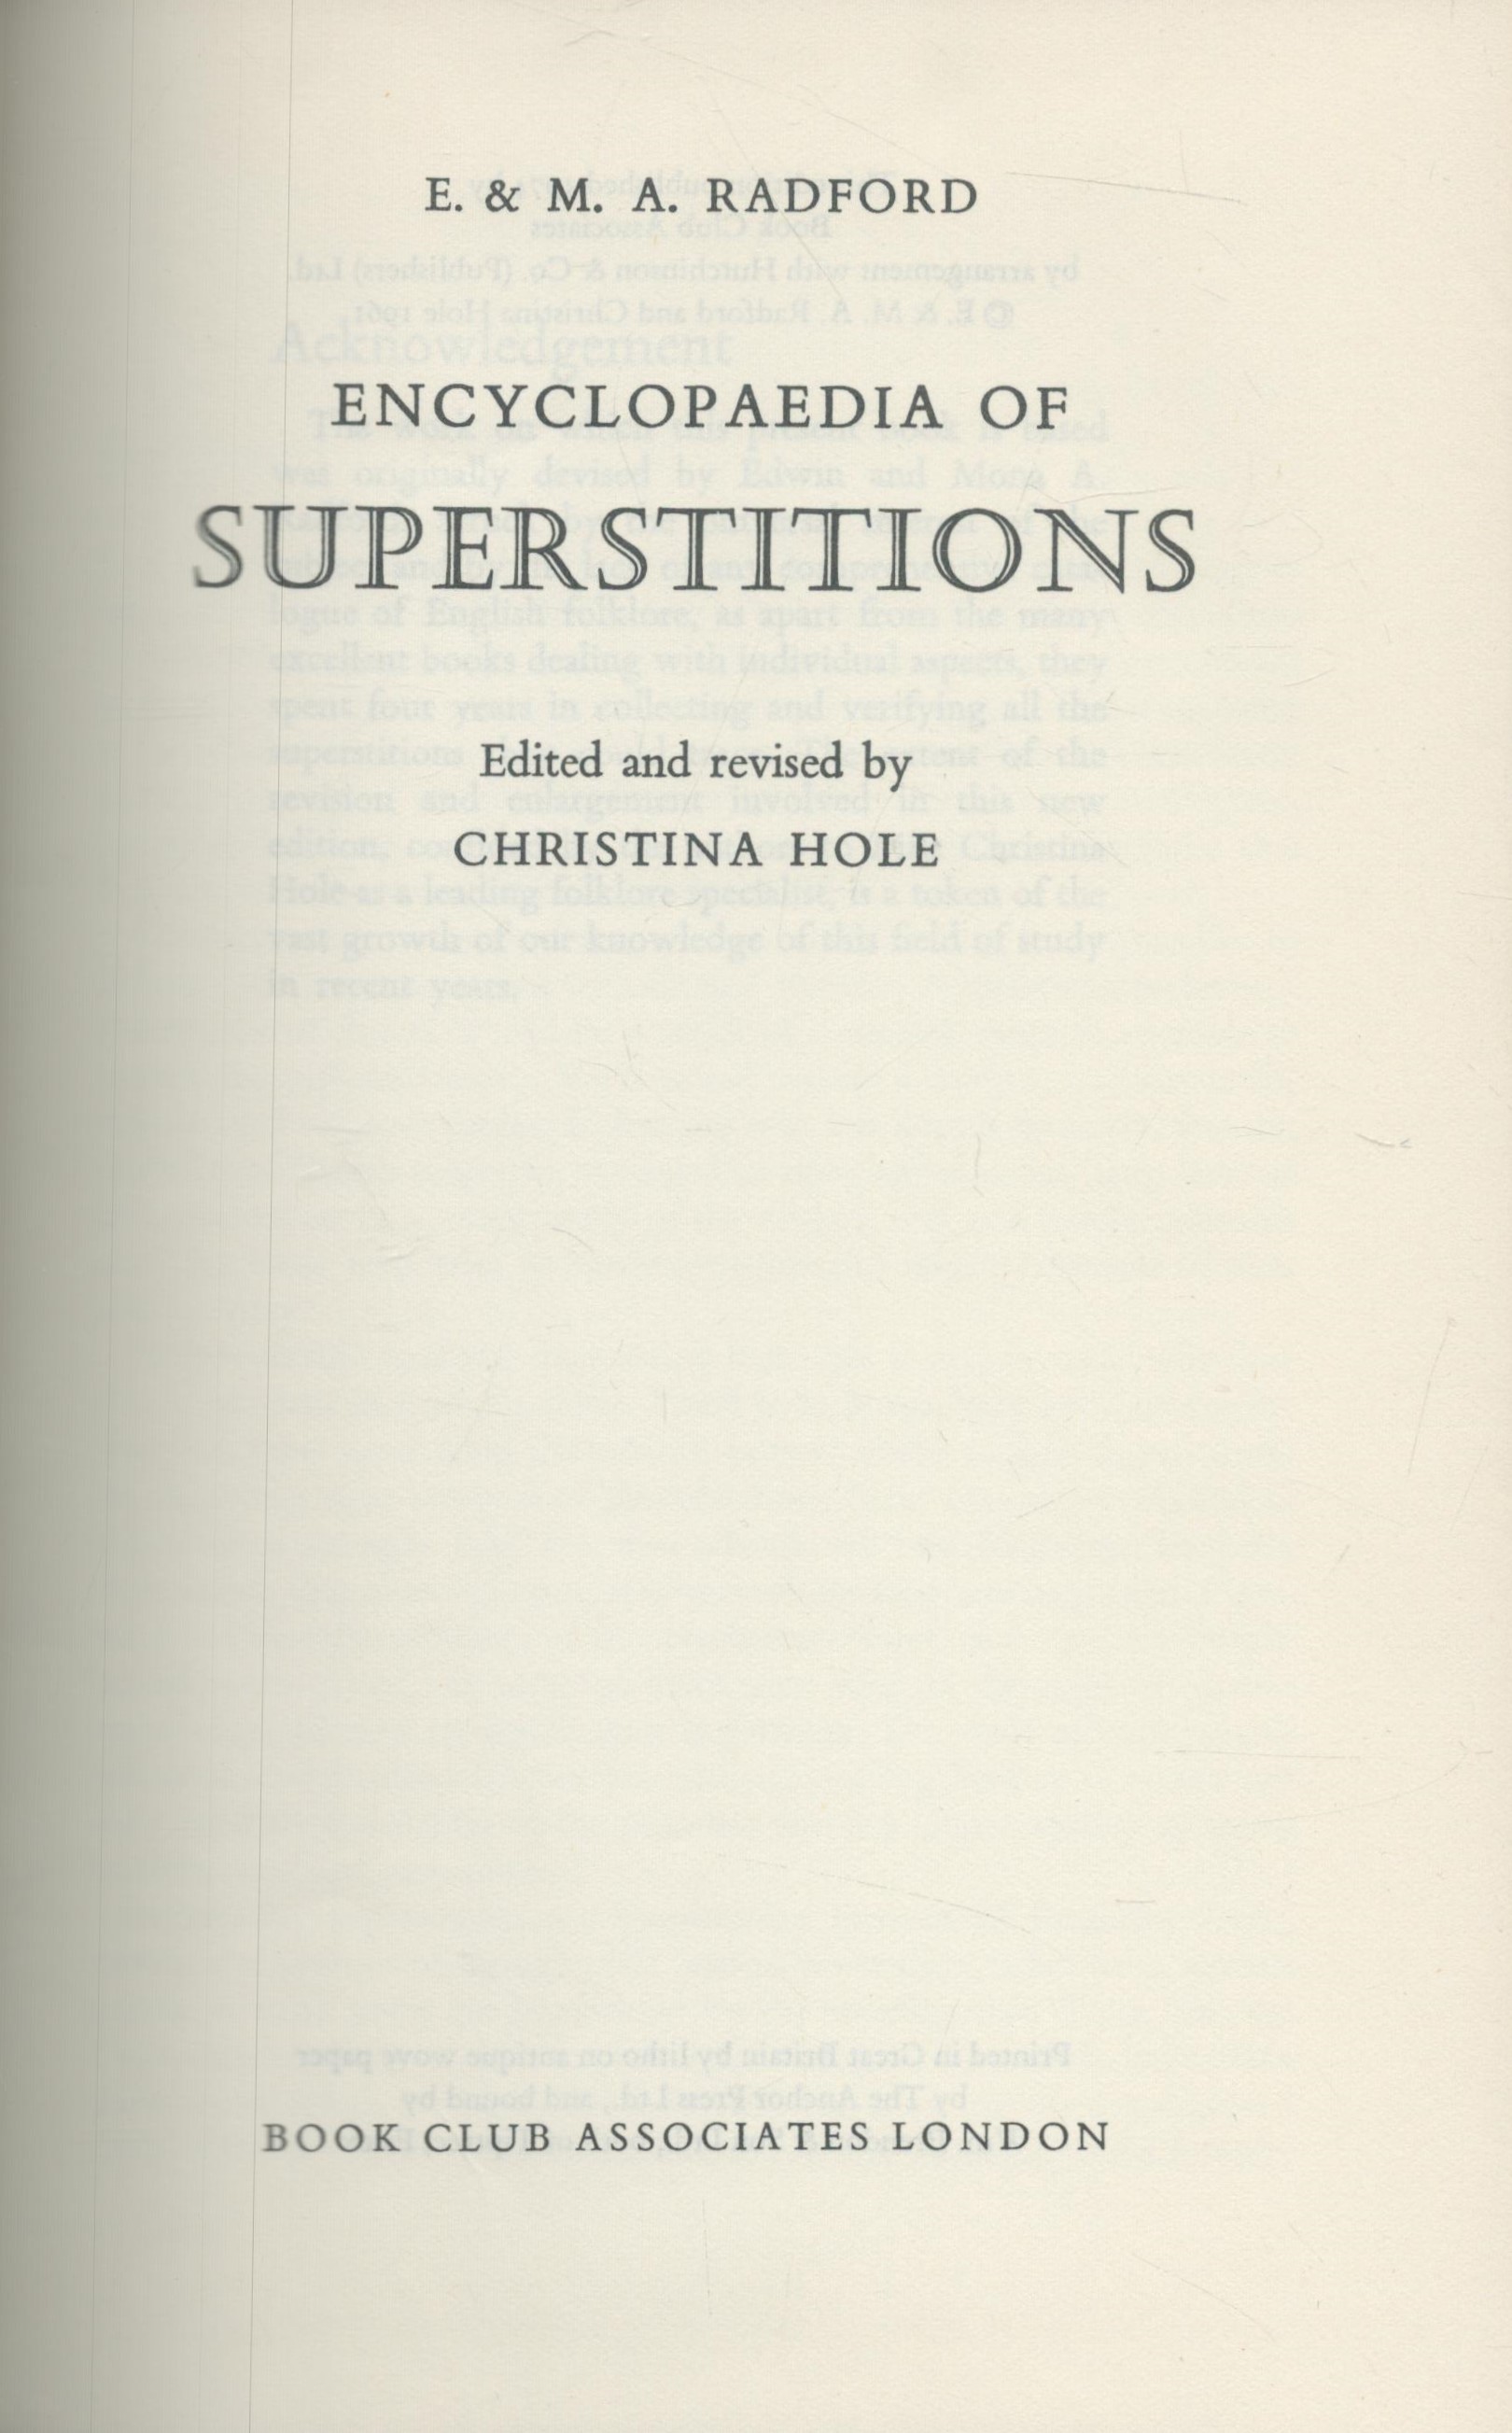 Encyclopaedia of Superstitions edited by Christina Hole 1974 hardback book with 384 pages, some - Image 2 of 3